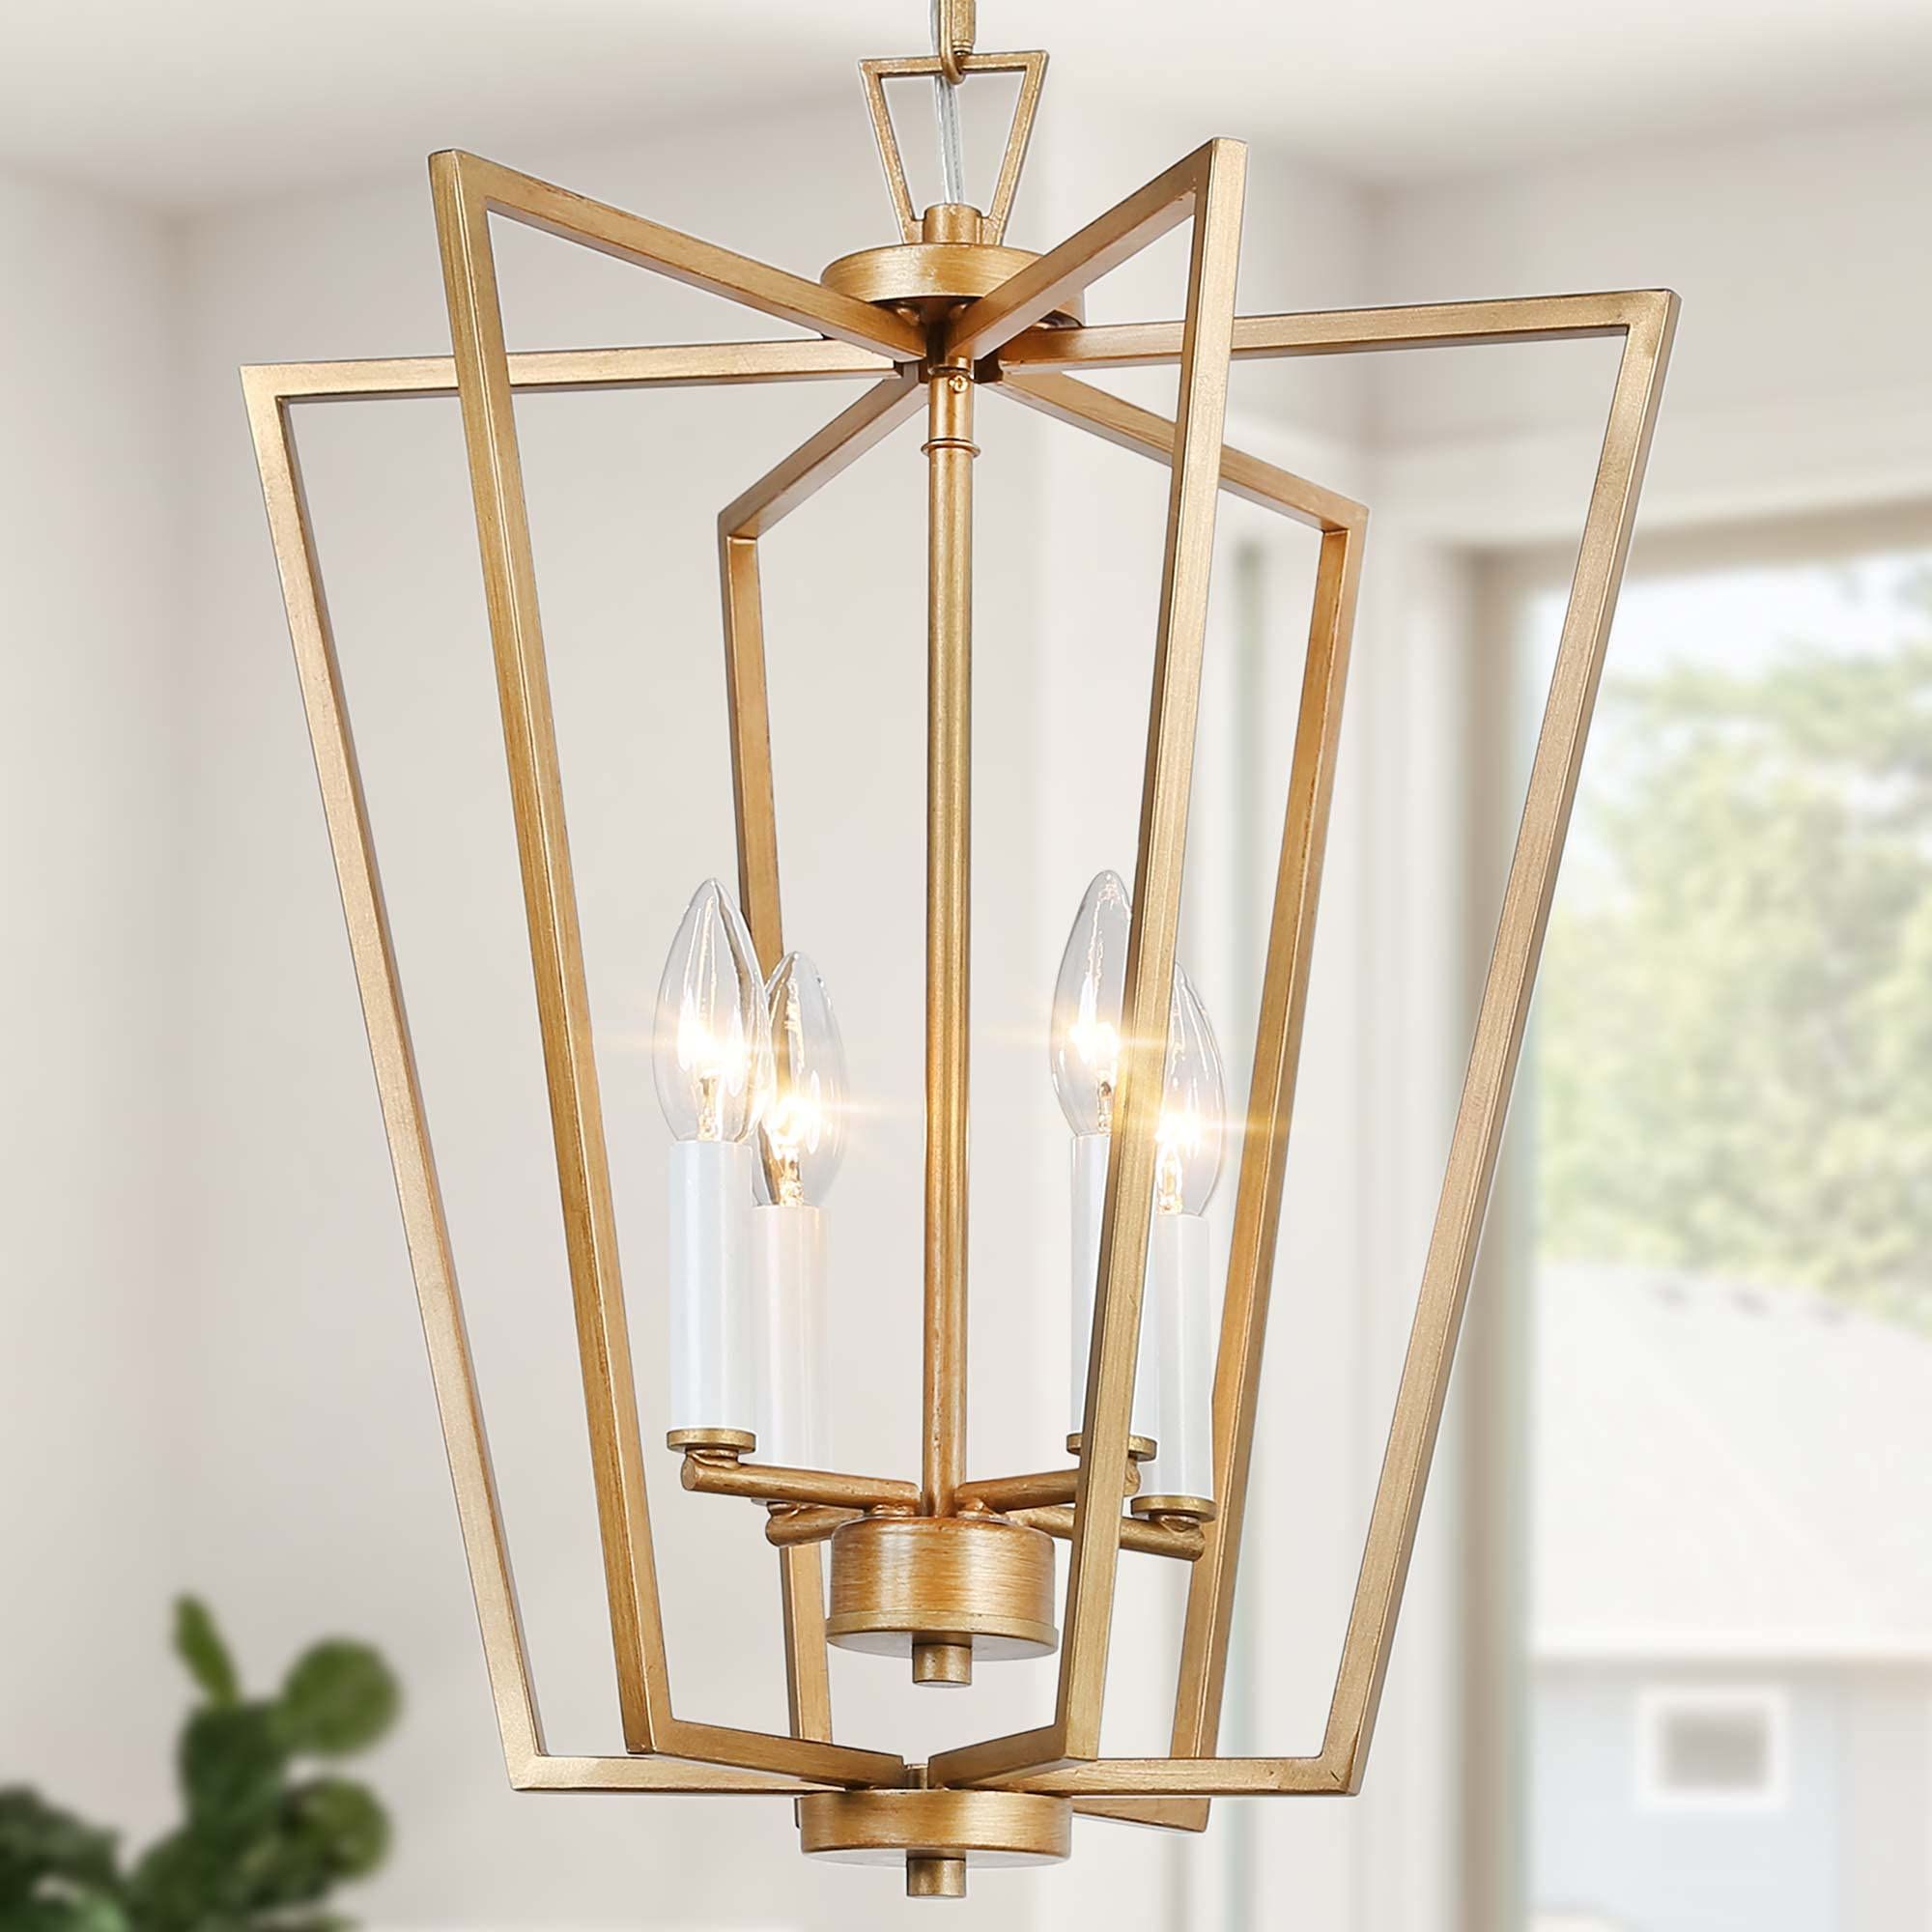 Well Liked Antique Gold Lantern Chandeliers Throughout Gold Chandelier, 4 Light Modern Lantern Gold Pendant Light With Rotatable  Framework For Kitchen Island, Dining Room, Foyer And Entryway, Antique  Brushed Gold,  (View 4 of 15)